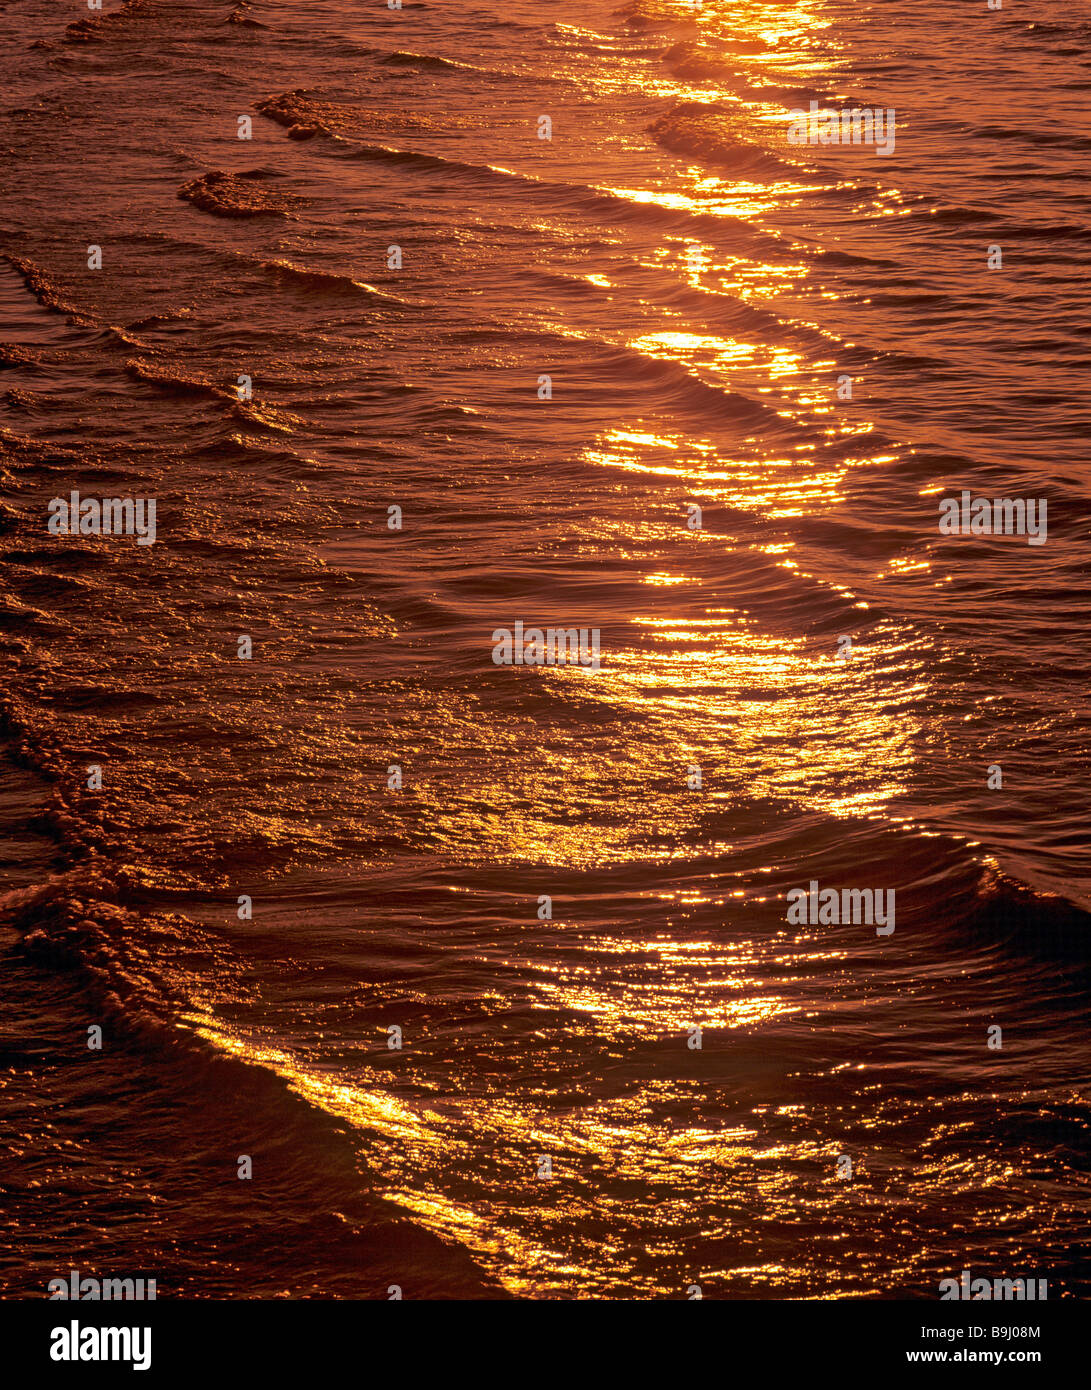 Golden light reflected in water, sunset Stock Photo